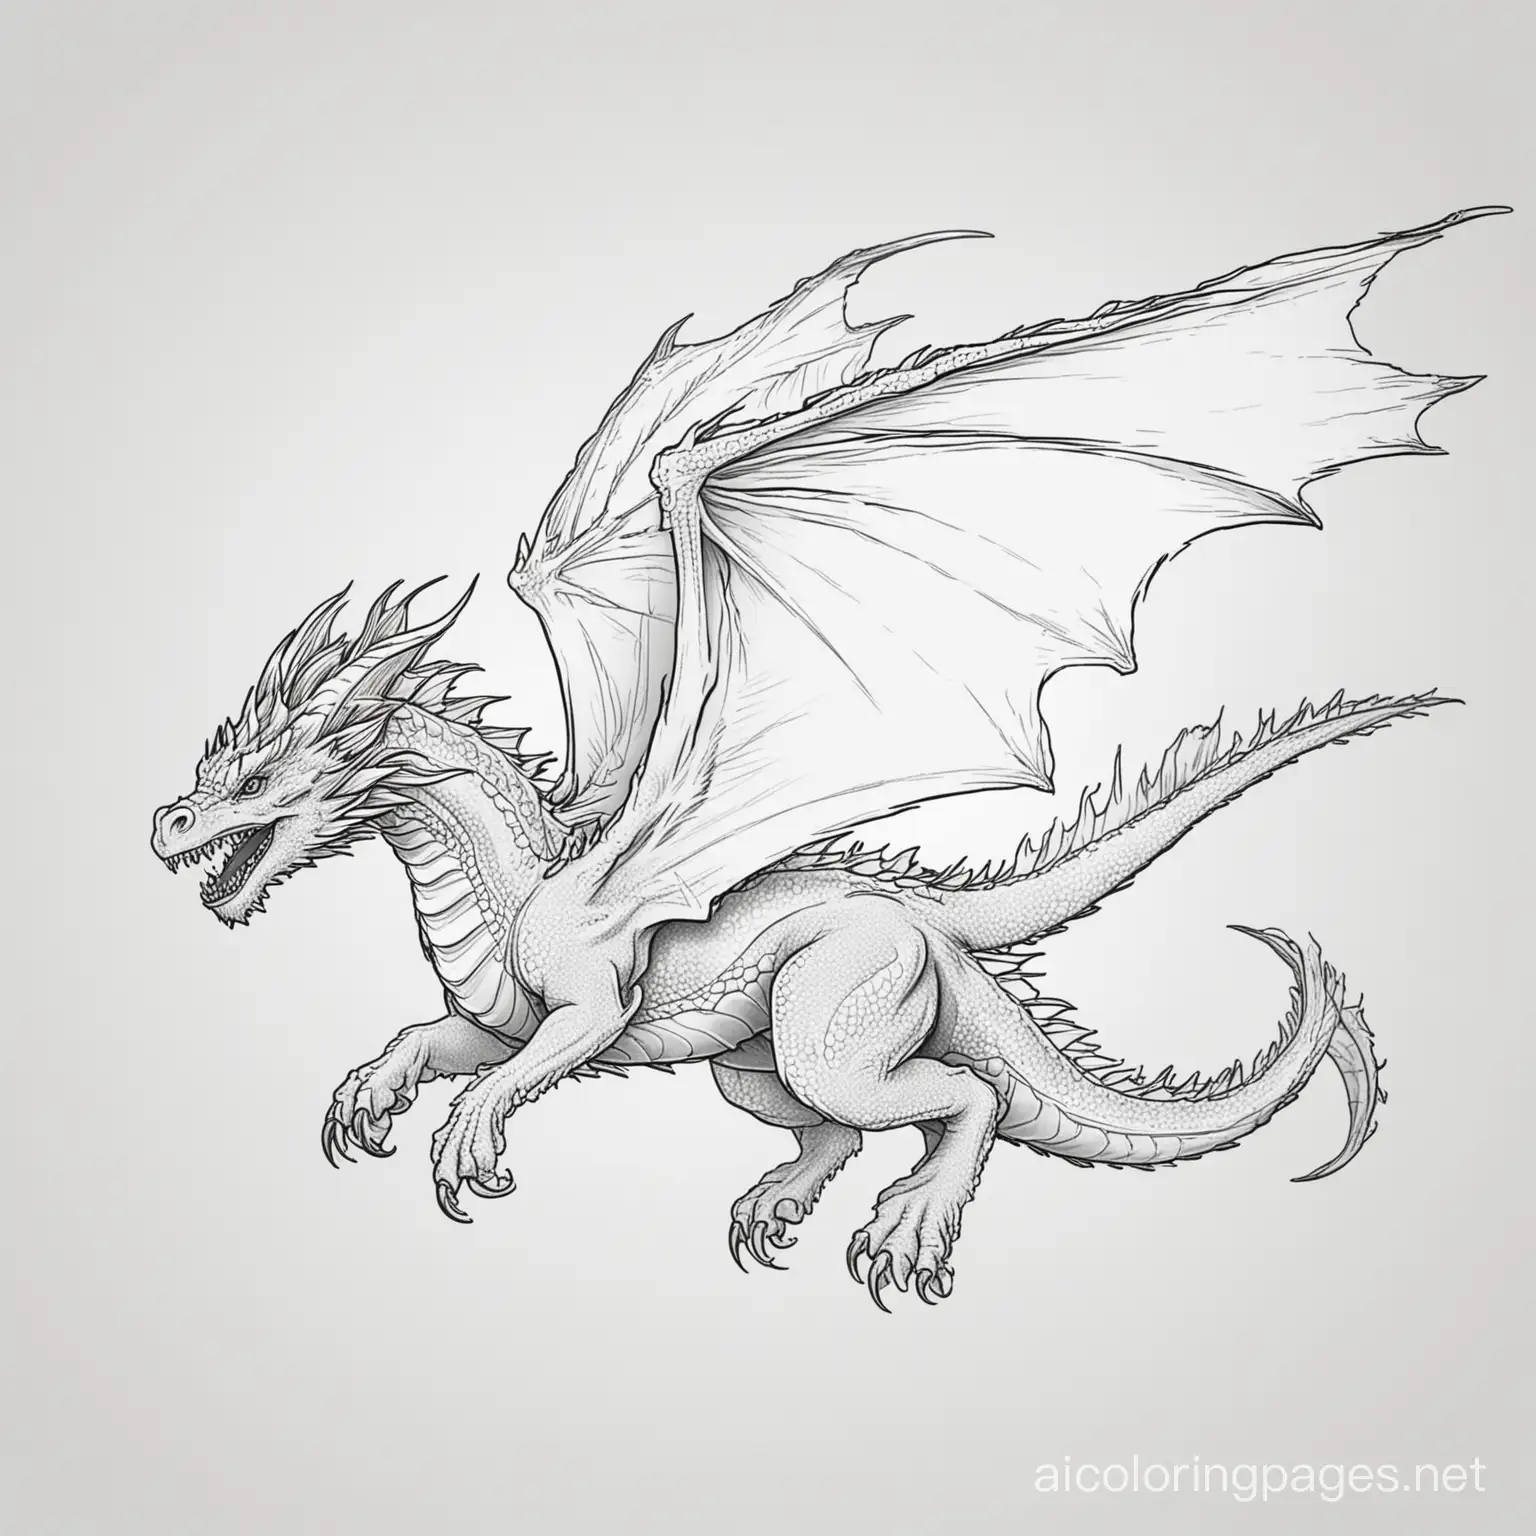 Flying-Ice-Dragon-Coloring-Page-Black-and-White-Line-Art-for-Kids